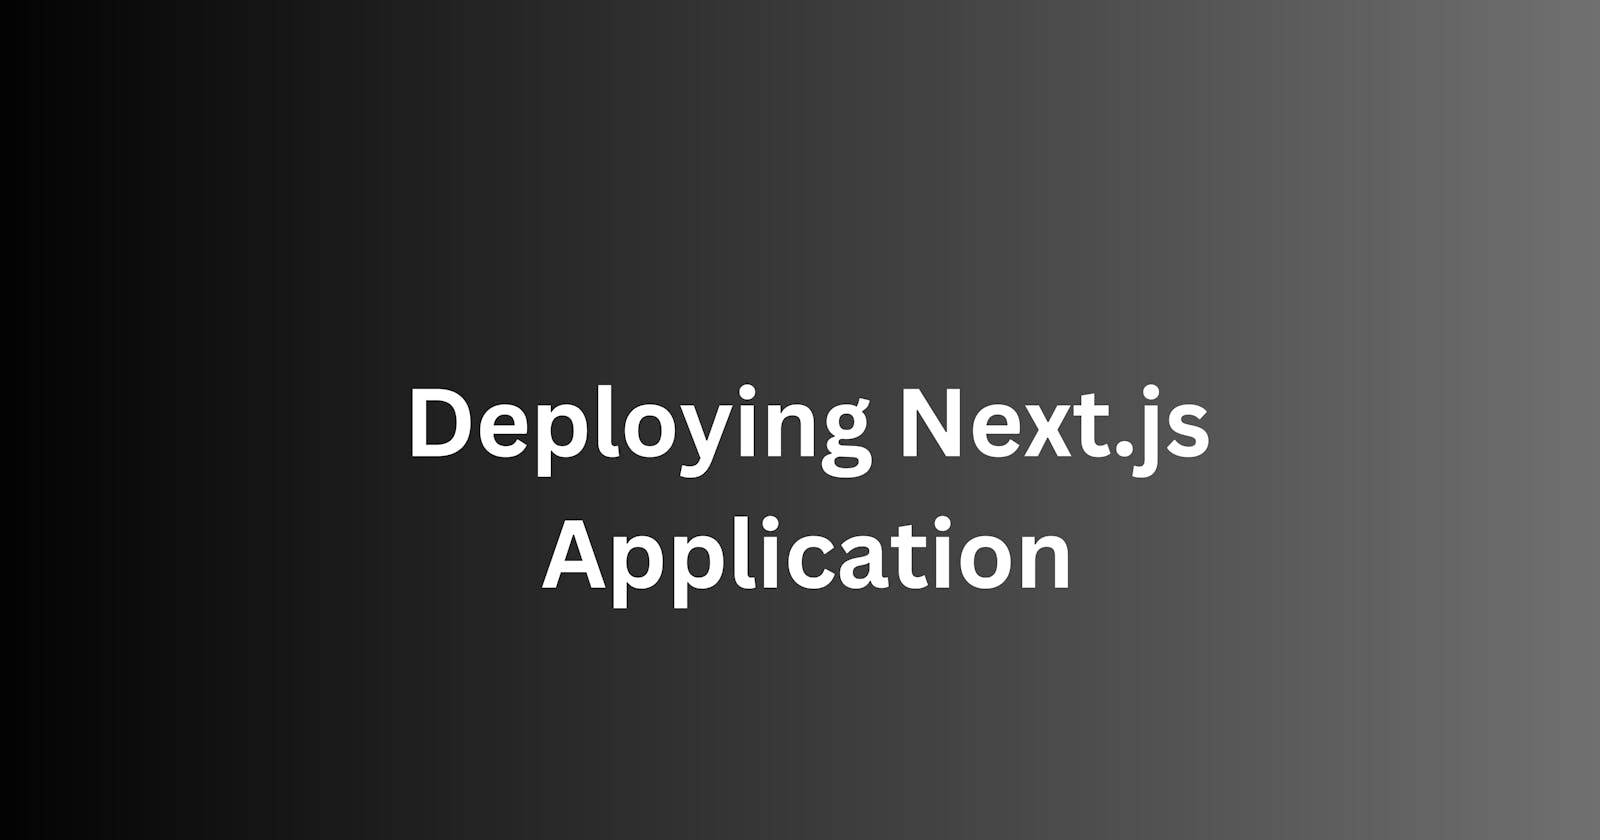 Top 10 Best Practices for Deploying Next.js Applications